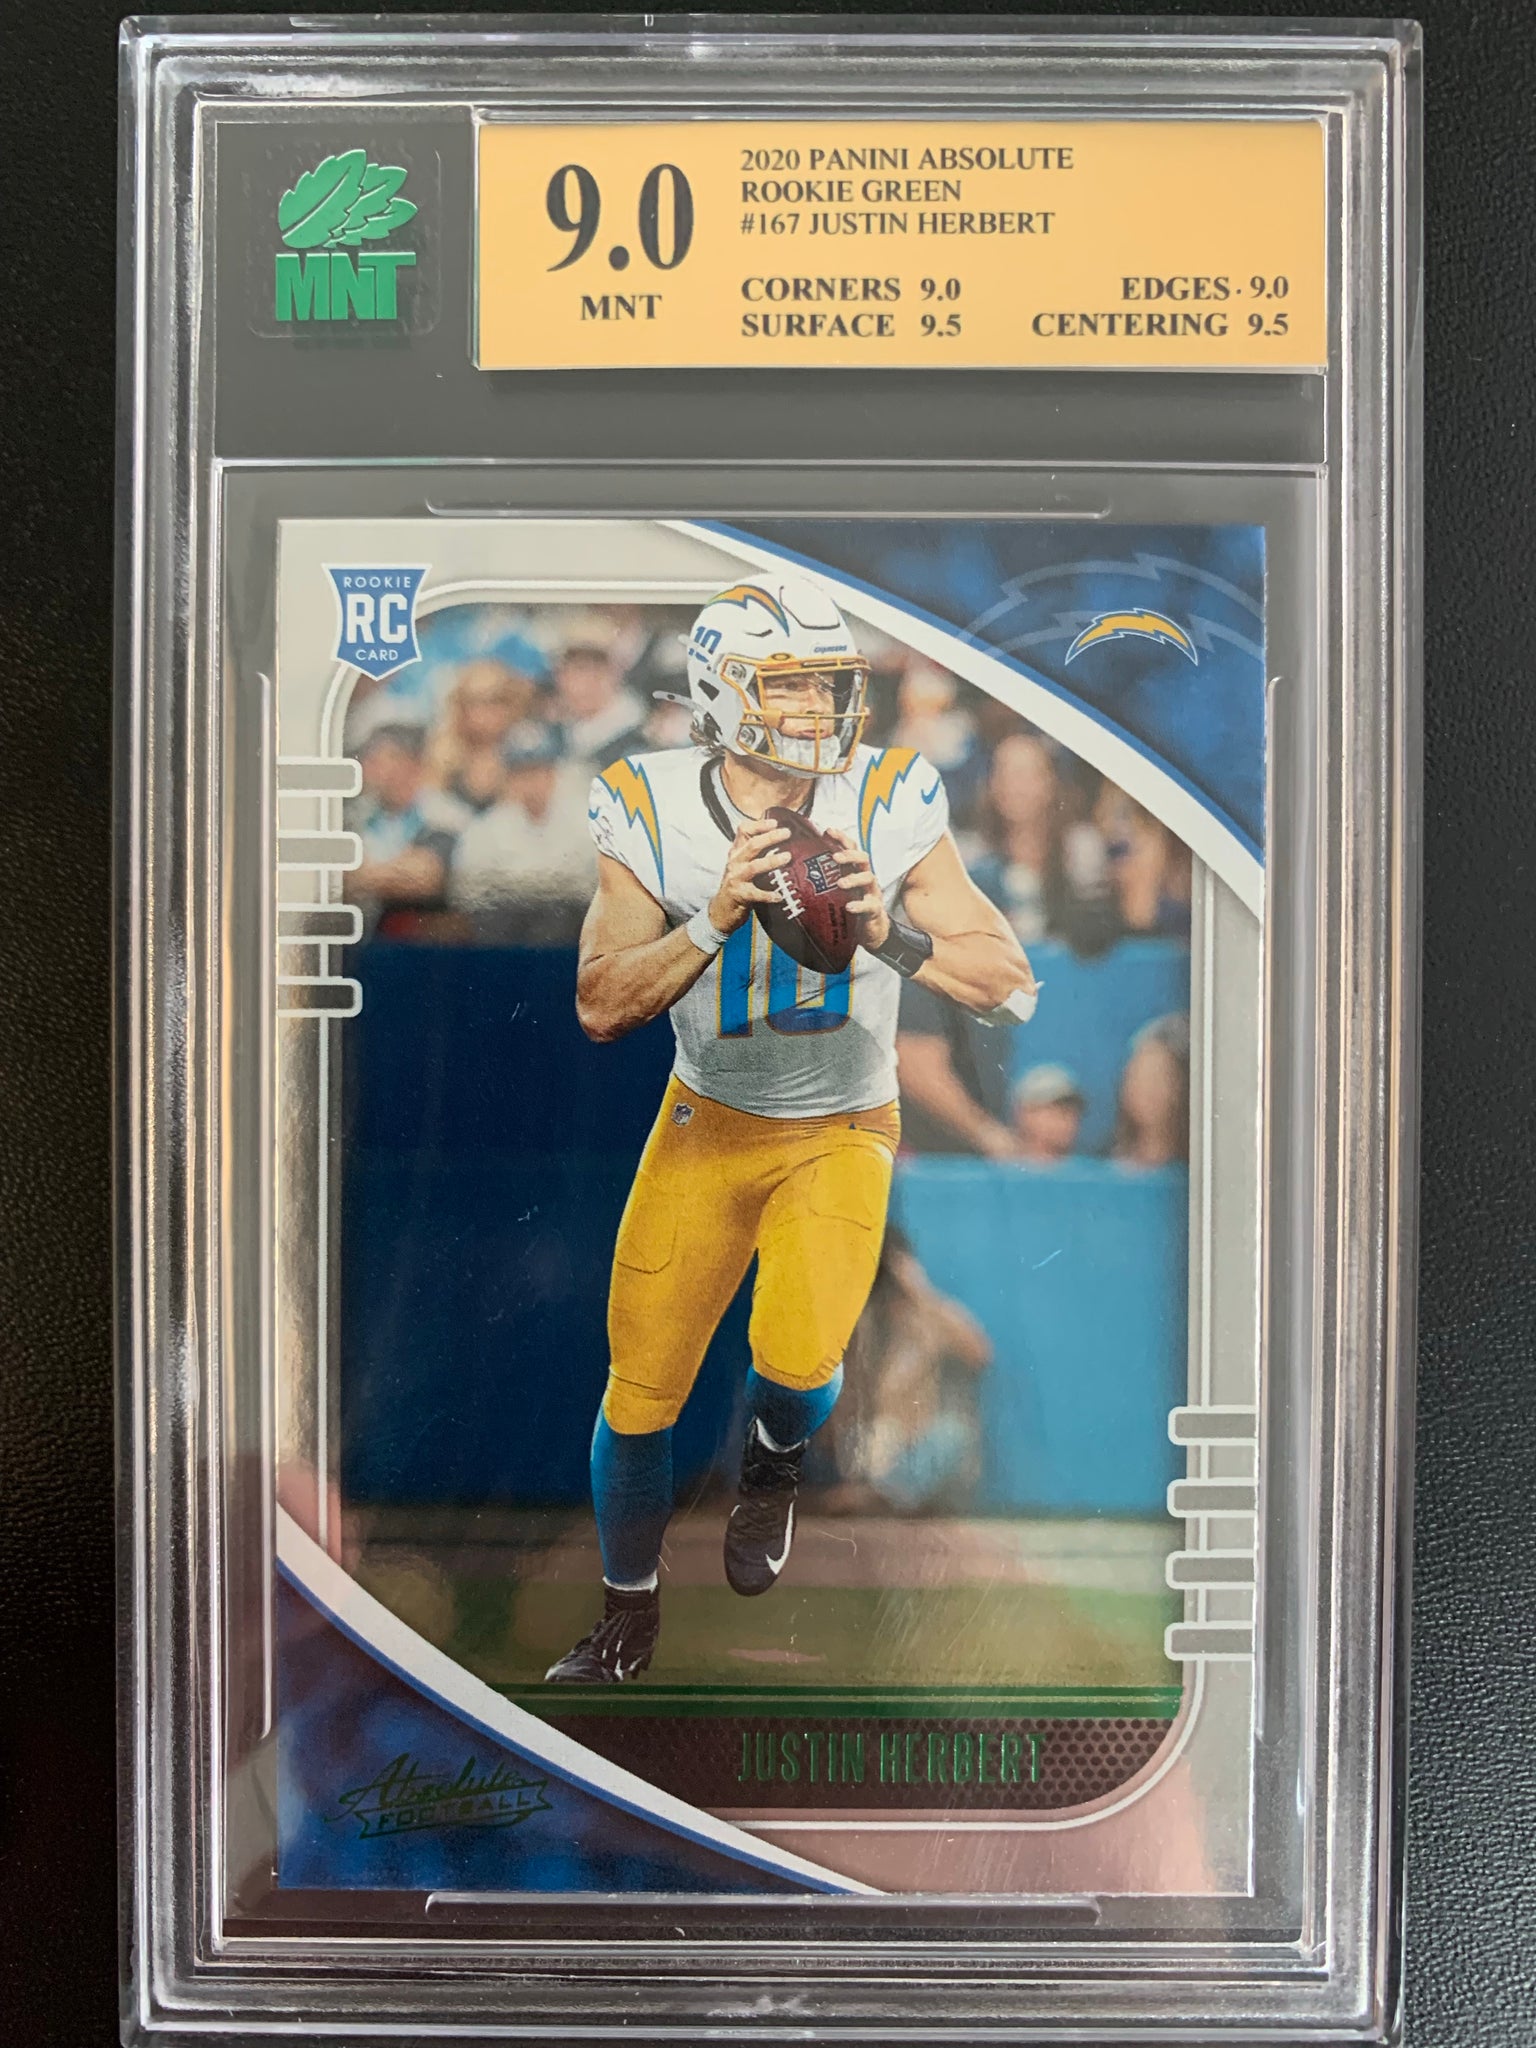 2020 PANINI ABSOLUTE FOOTBALL #167 LOS ANGELES CHARGERS - JUSTIN HERBERT GREEN FOIL ROOKIE CARD GRADED MNT 9.0 MINT